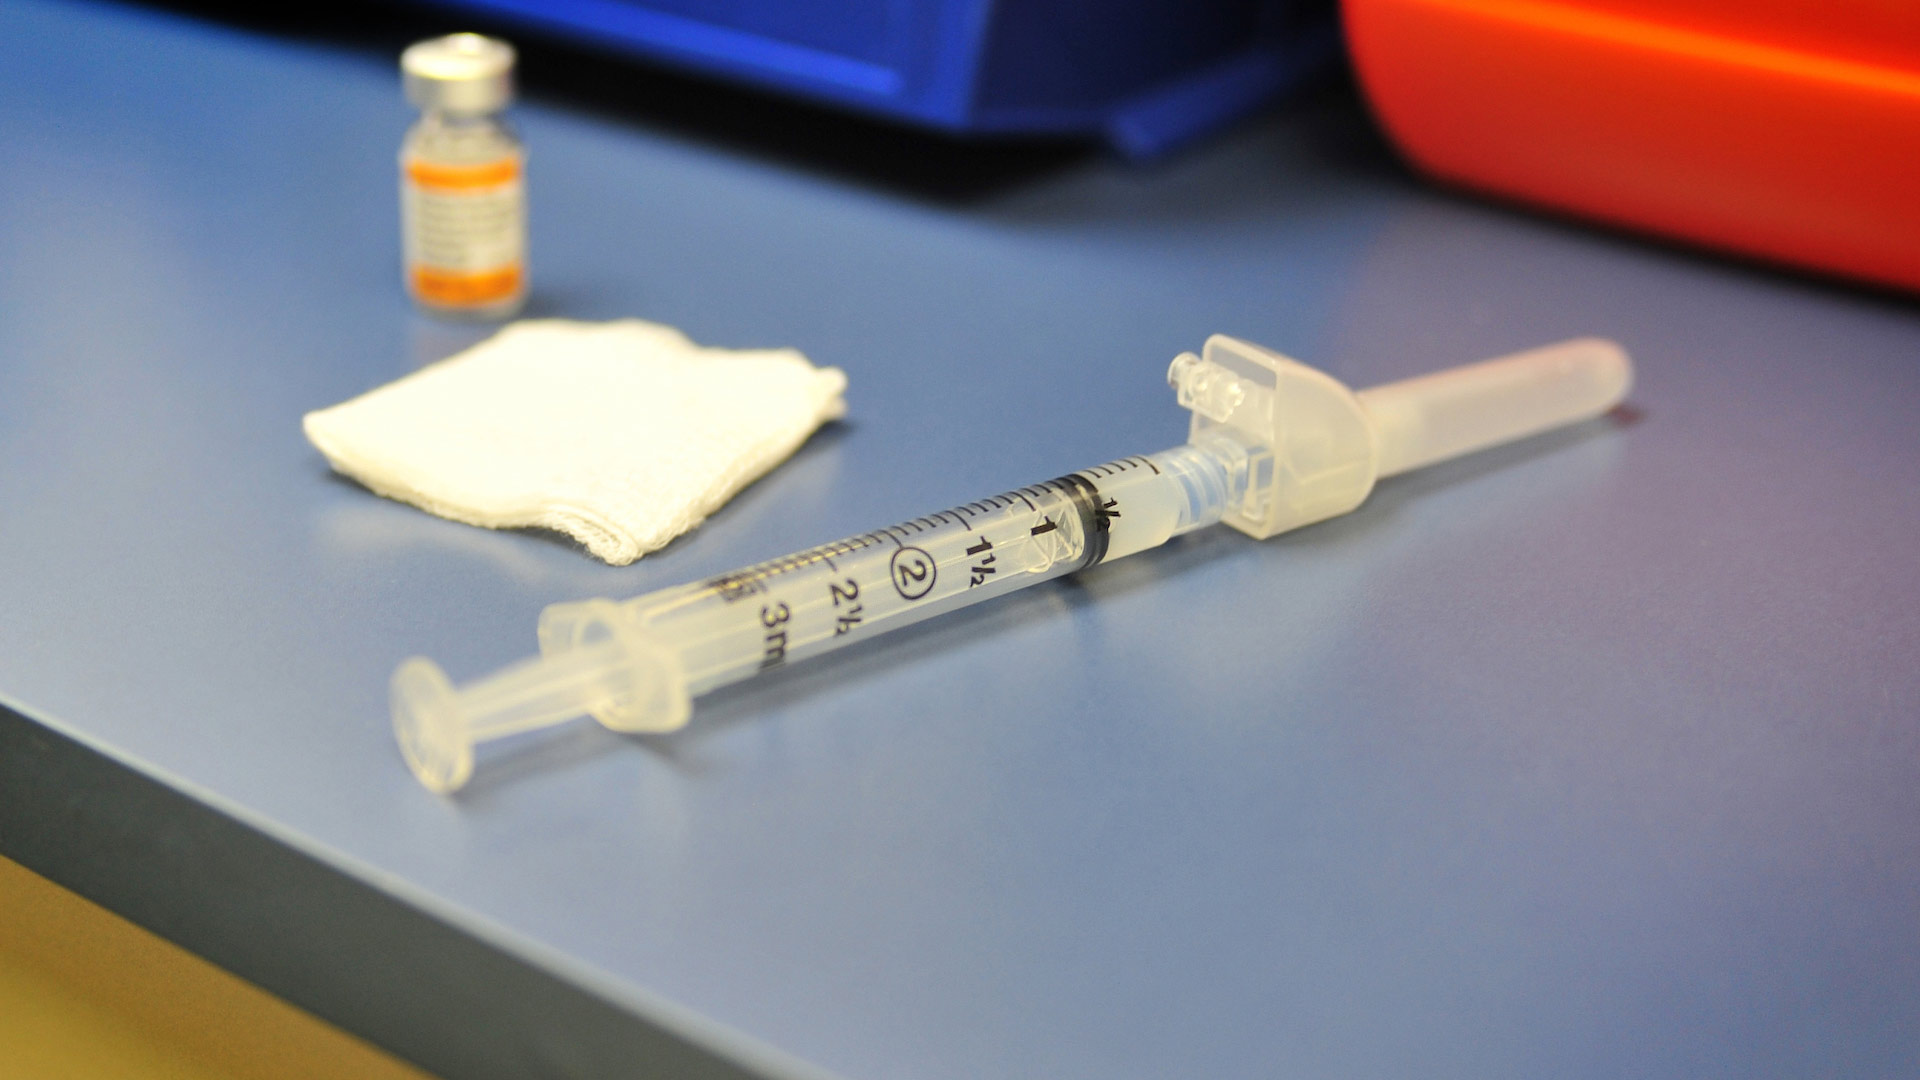 Pediatricians are concerned that most Arizona children have missed routine vaccinations.